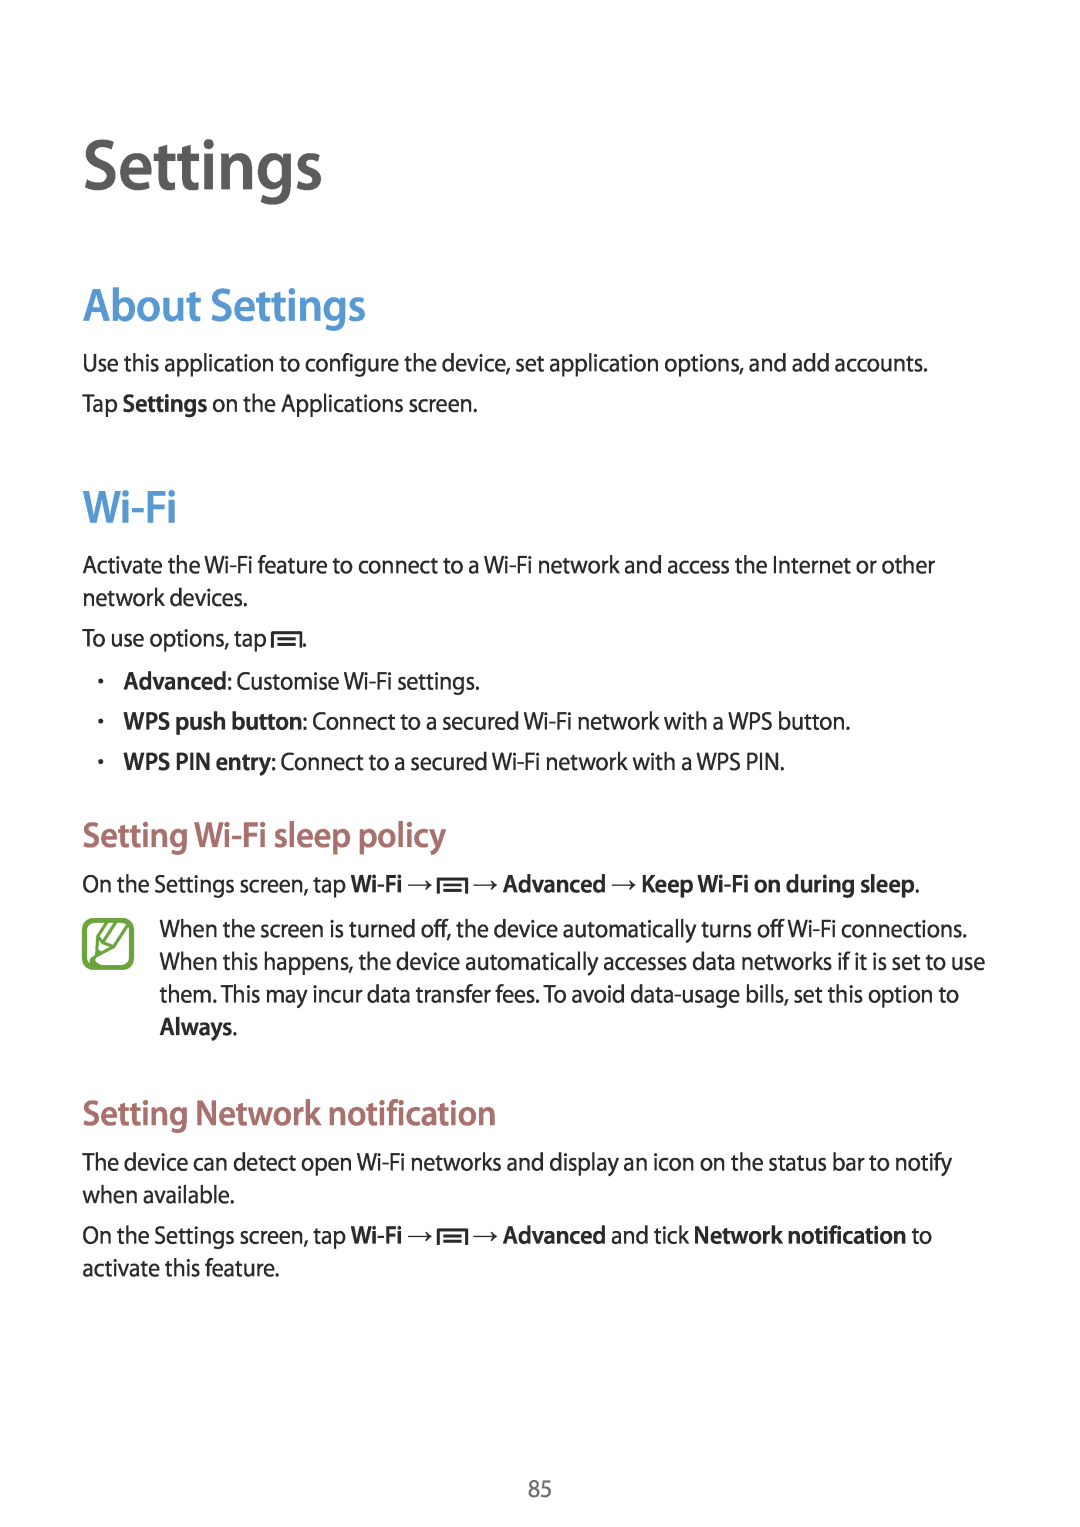 Samsung GT-S6790PWNTIM, GT-S6790ZWYSEB About Settings, Setting Wi-Fi sleep policy, Setting Network notification 